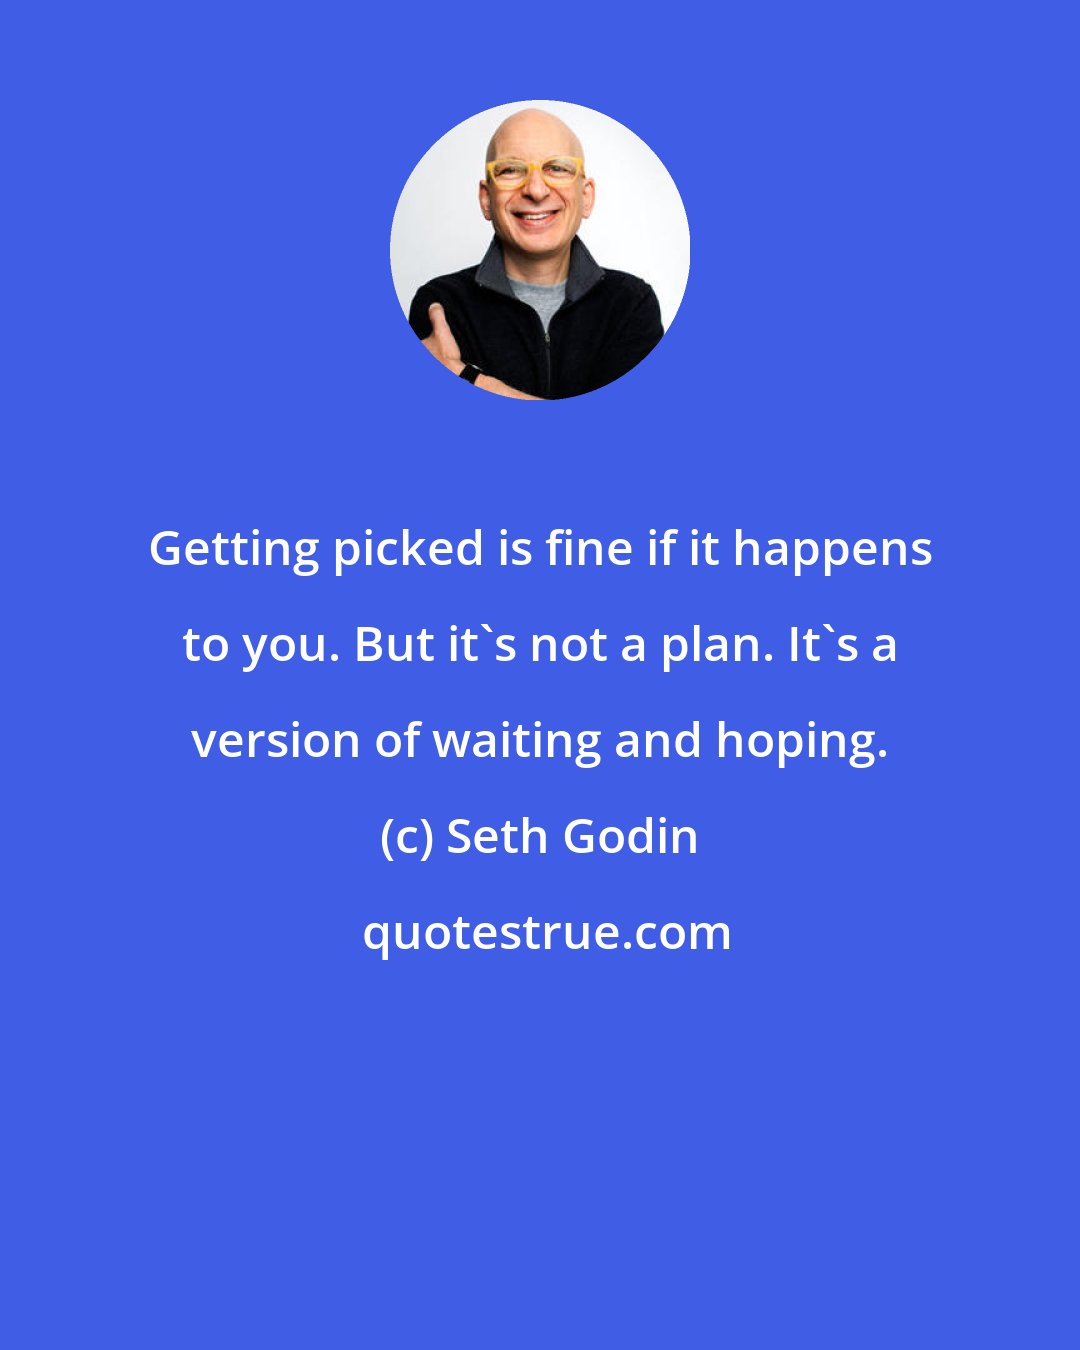 Seth Godin: Getting picked is fine if it happens to you. But it's not a plan. It's a version of waiting and hoping.